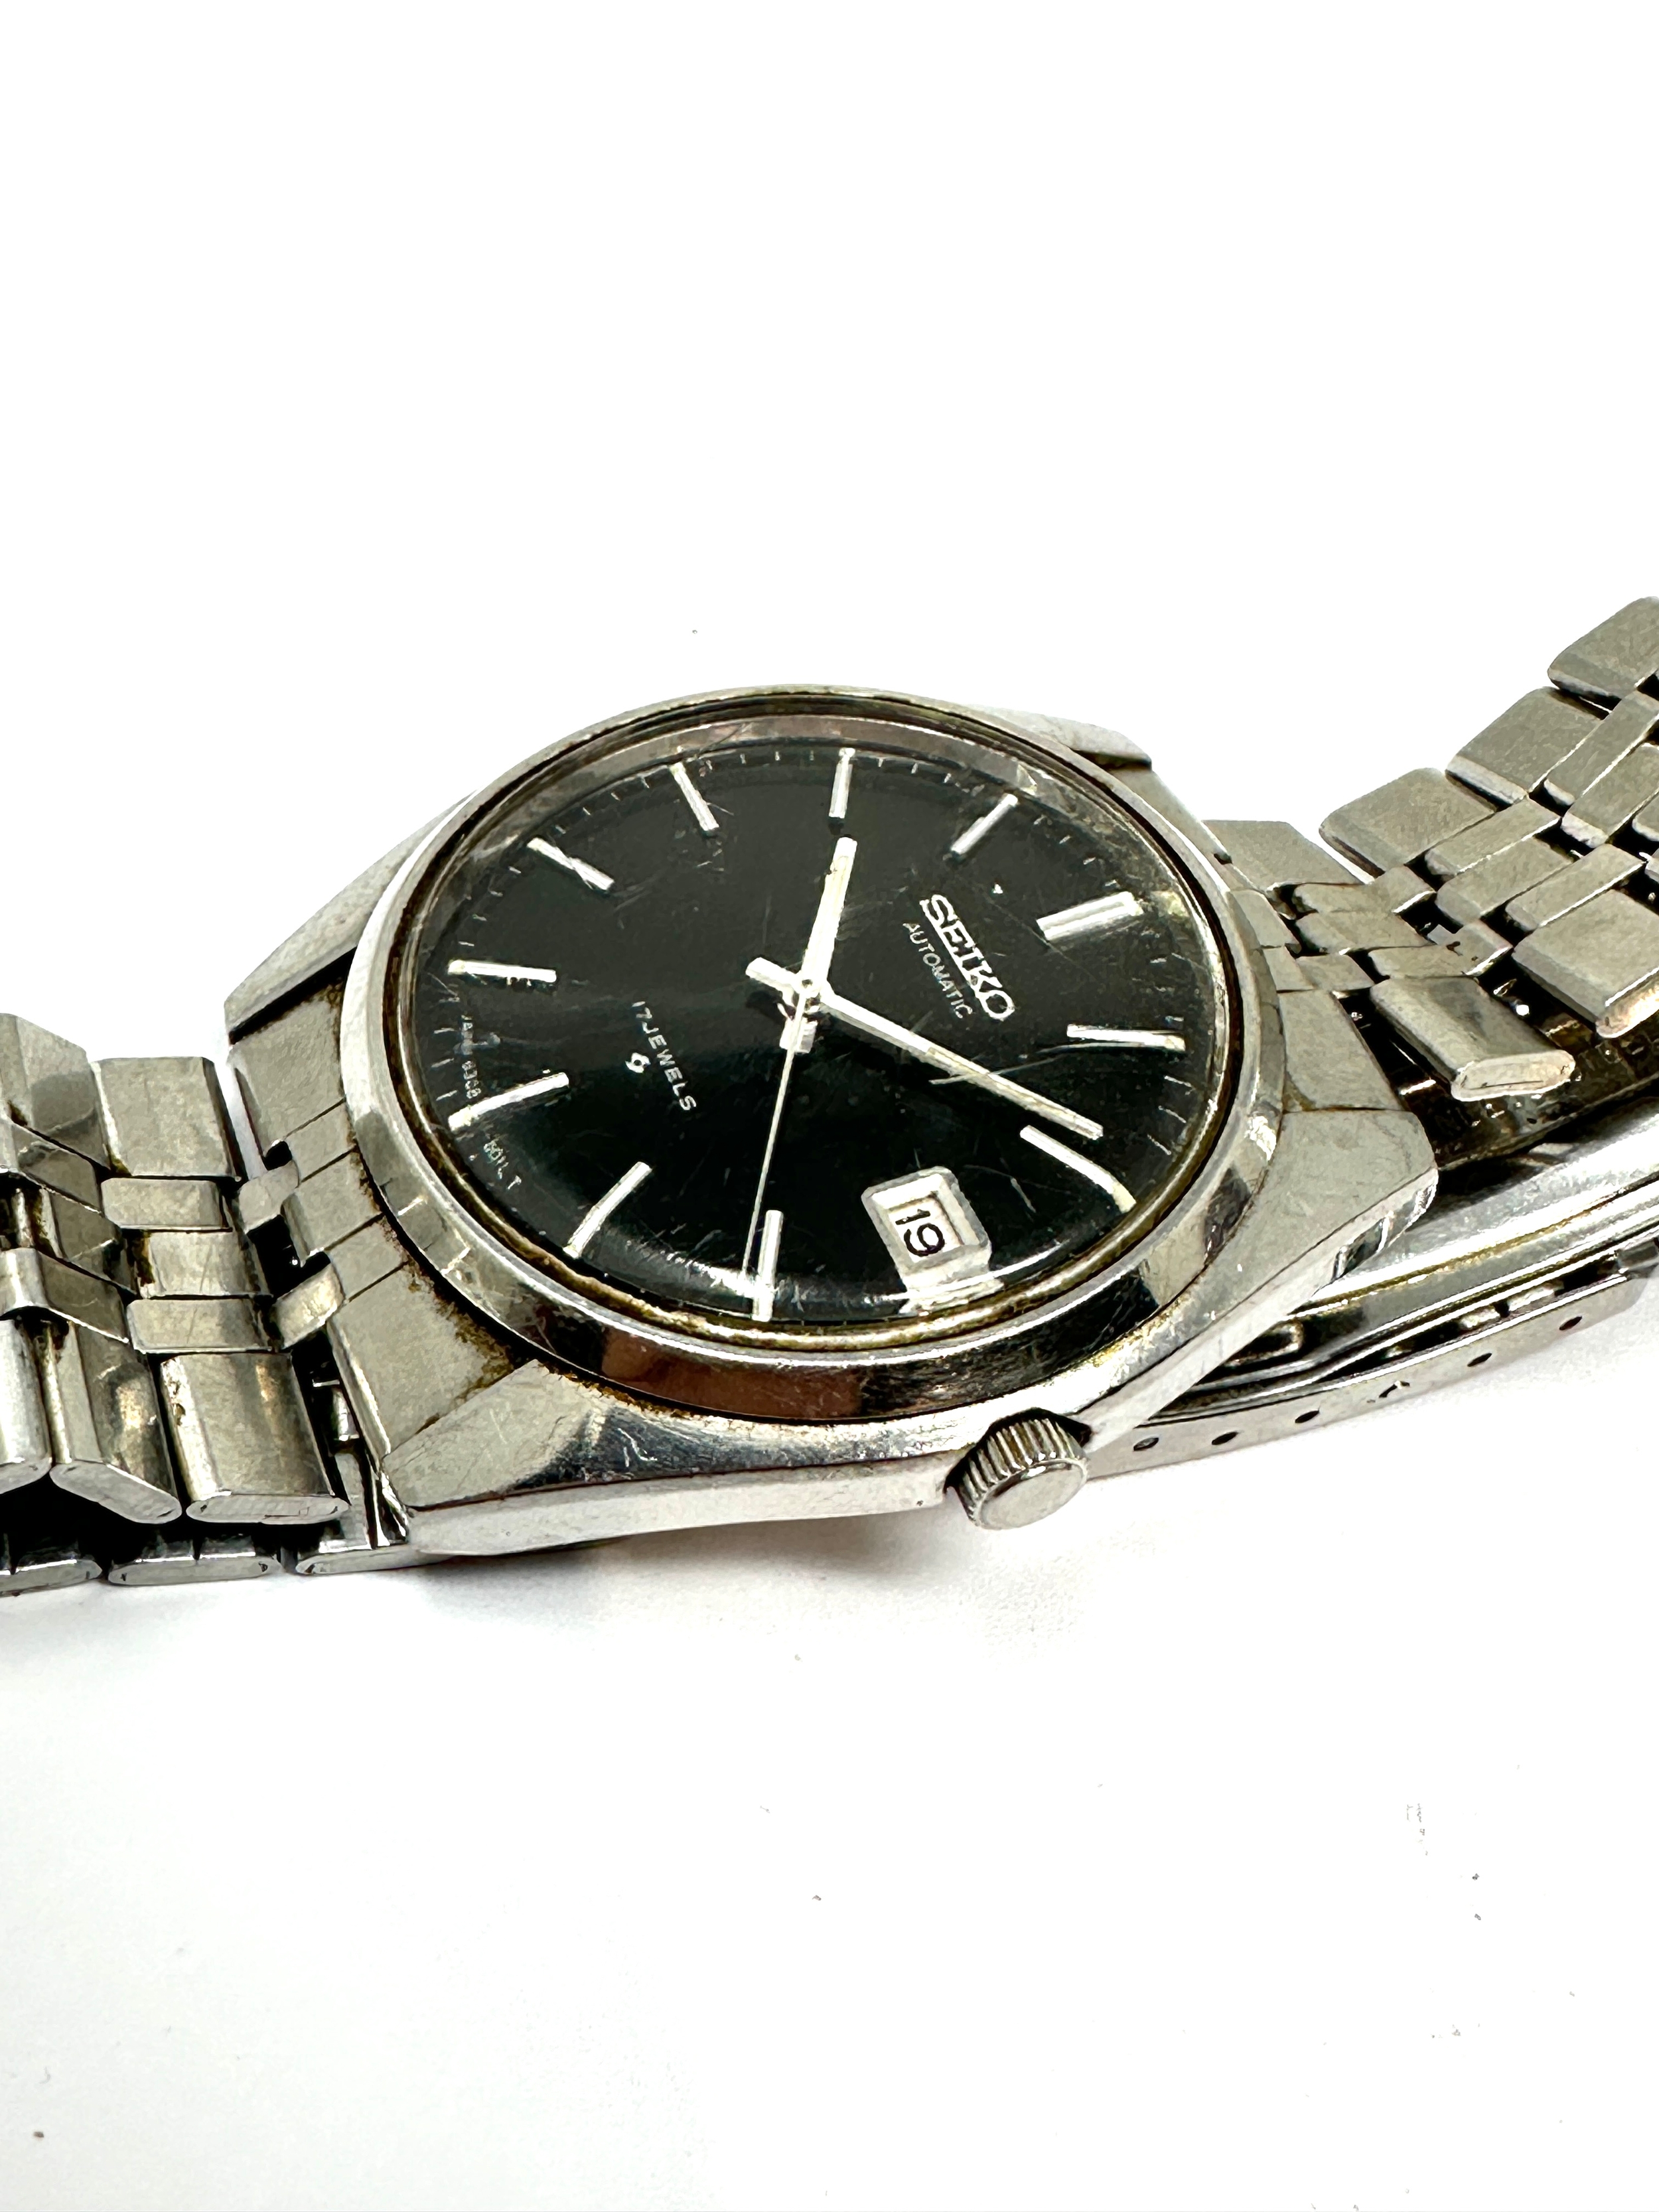 Seiko automatic gents wristwatch black dial 6308-8010 the watch is ticking - Image 2 of 4